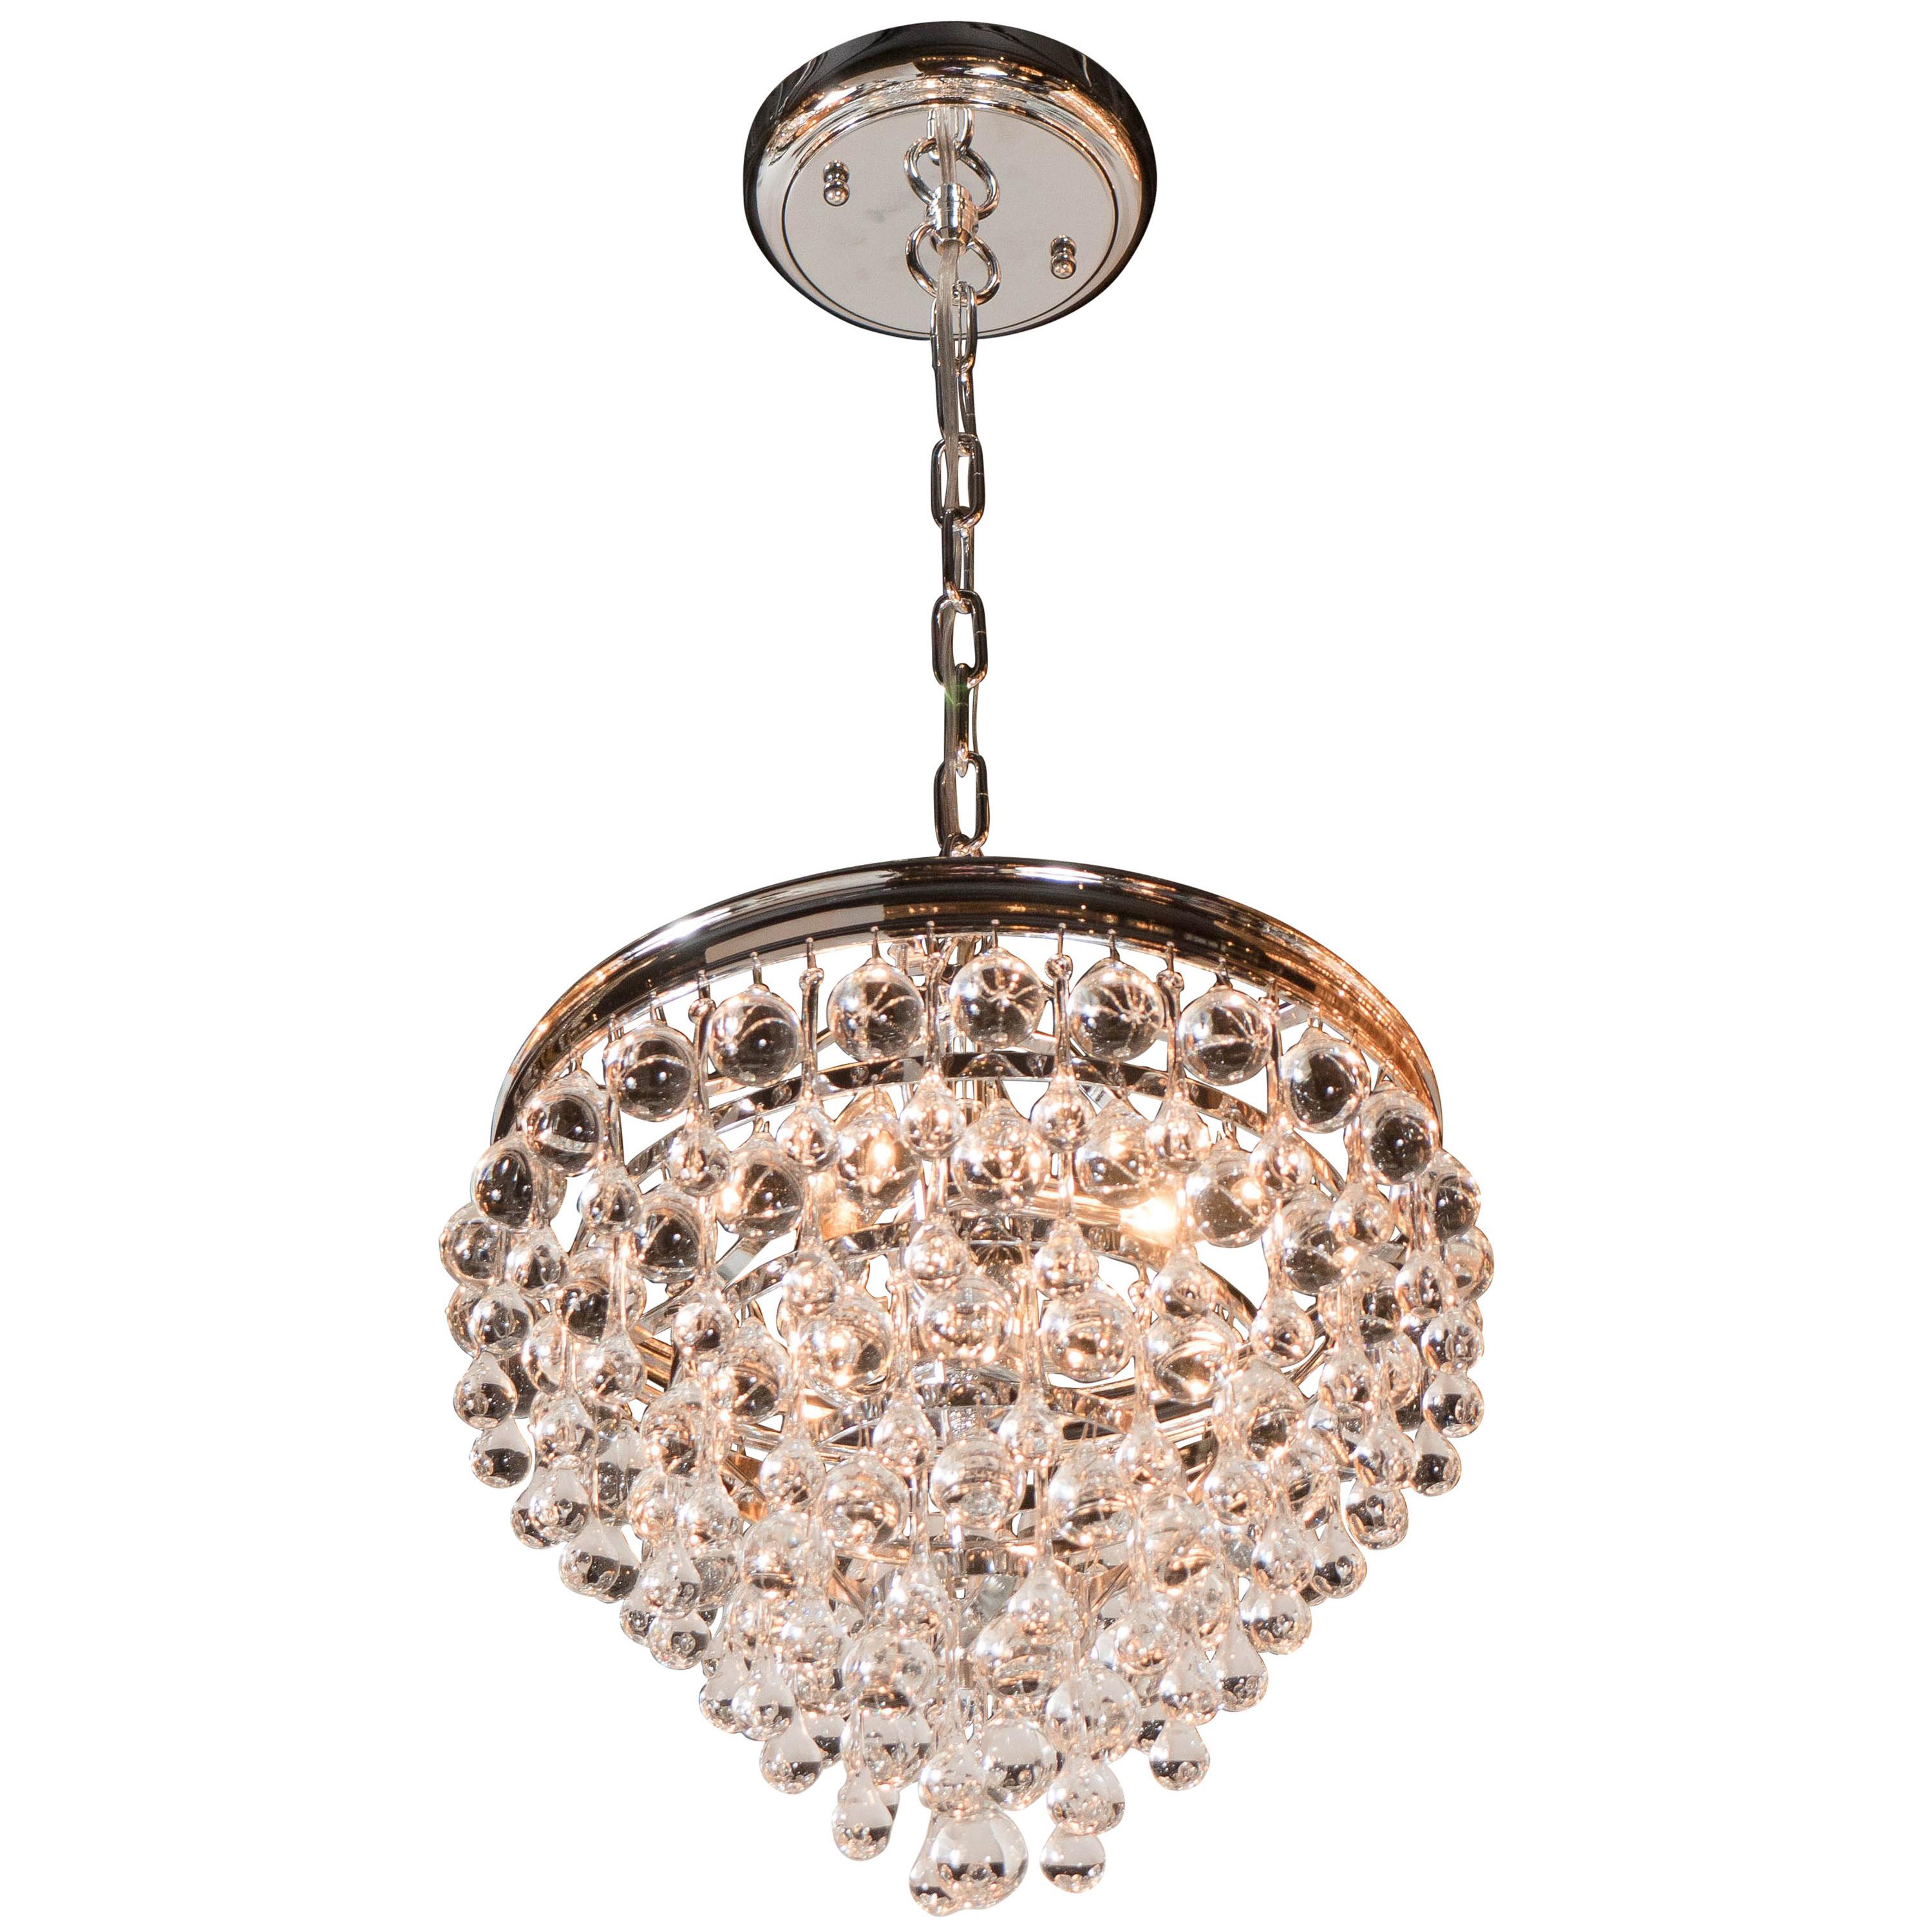 Hollywood Teardrop and Crystal Ball Chandelier in Nickel and Handblown Glass